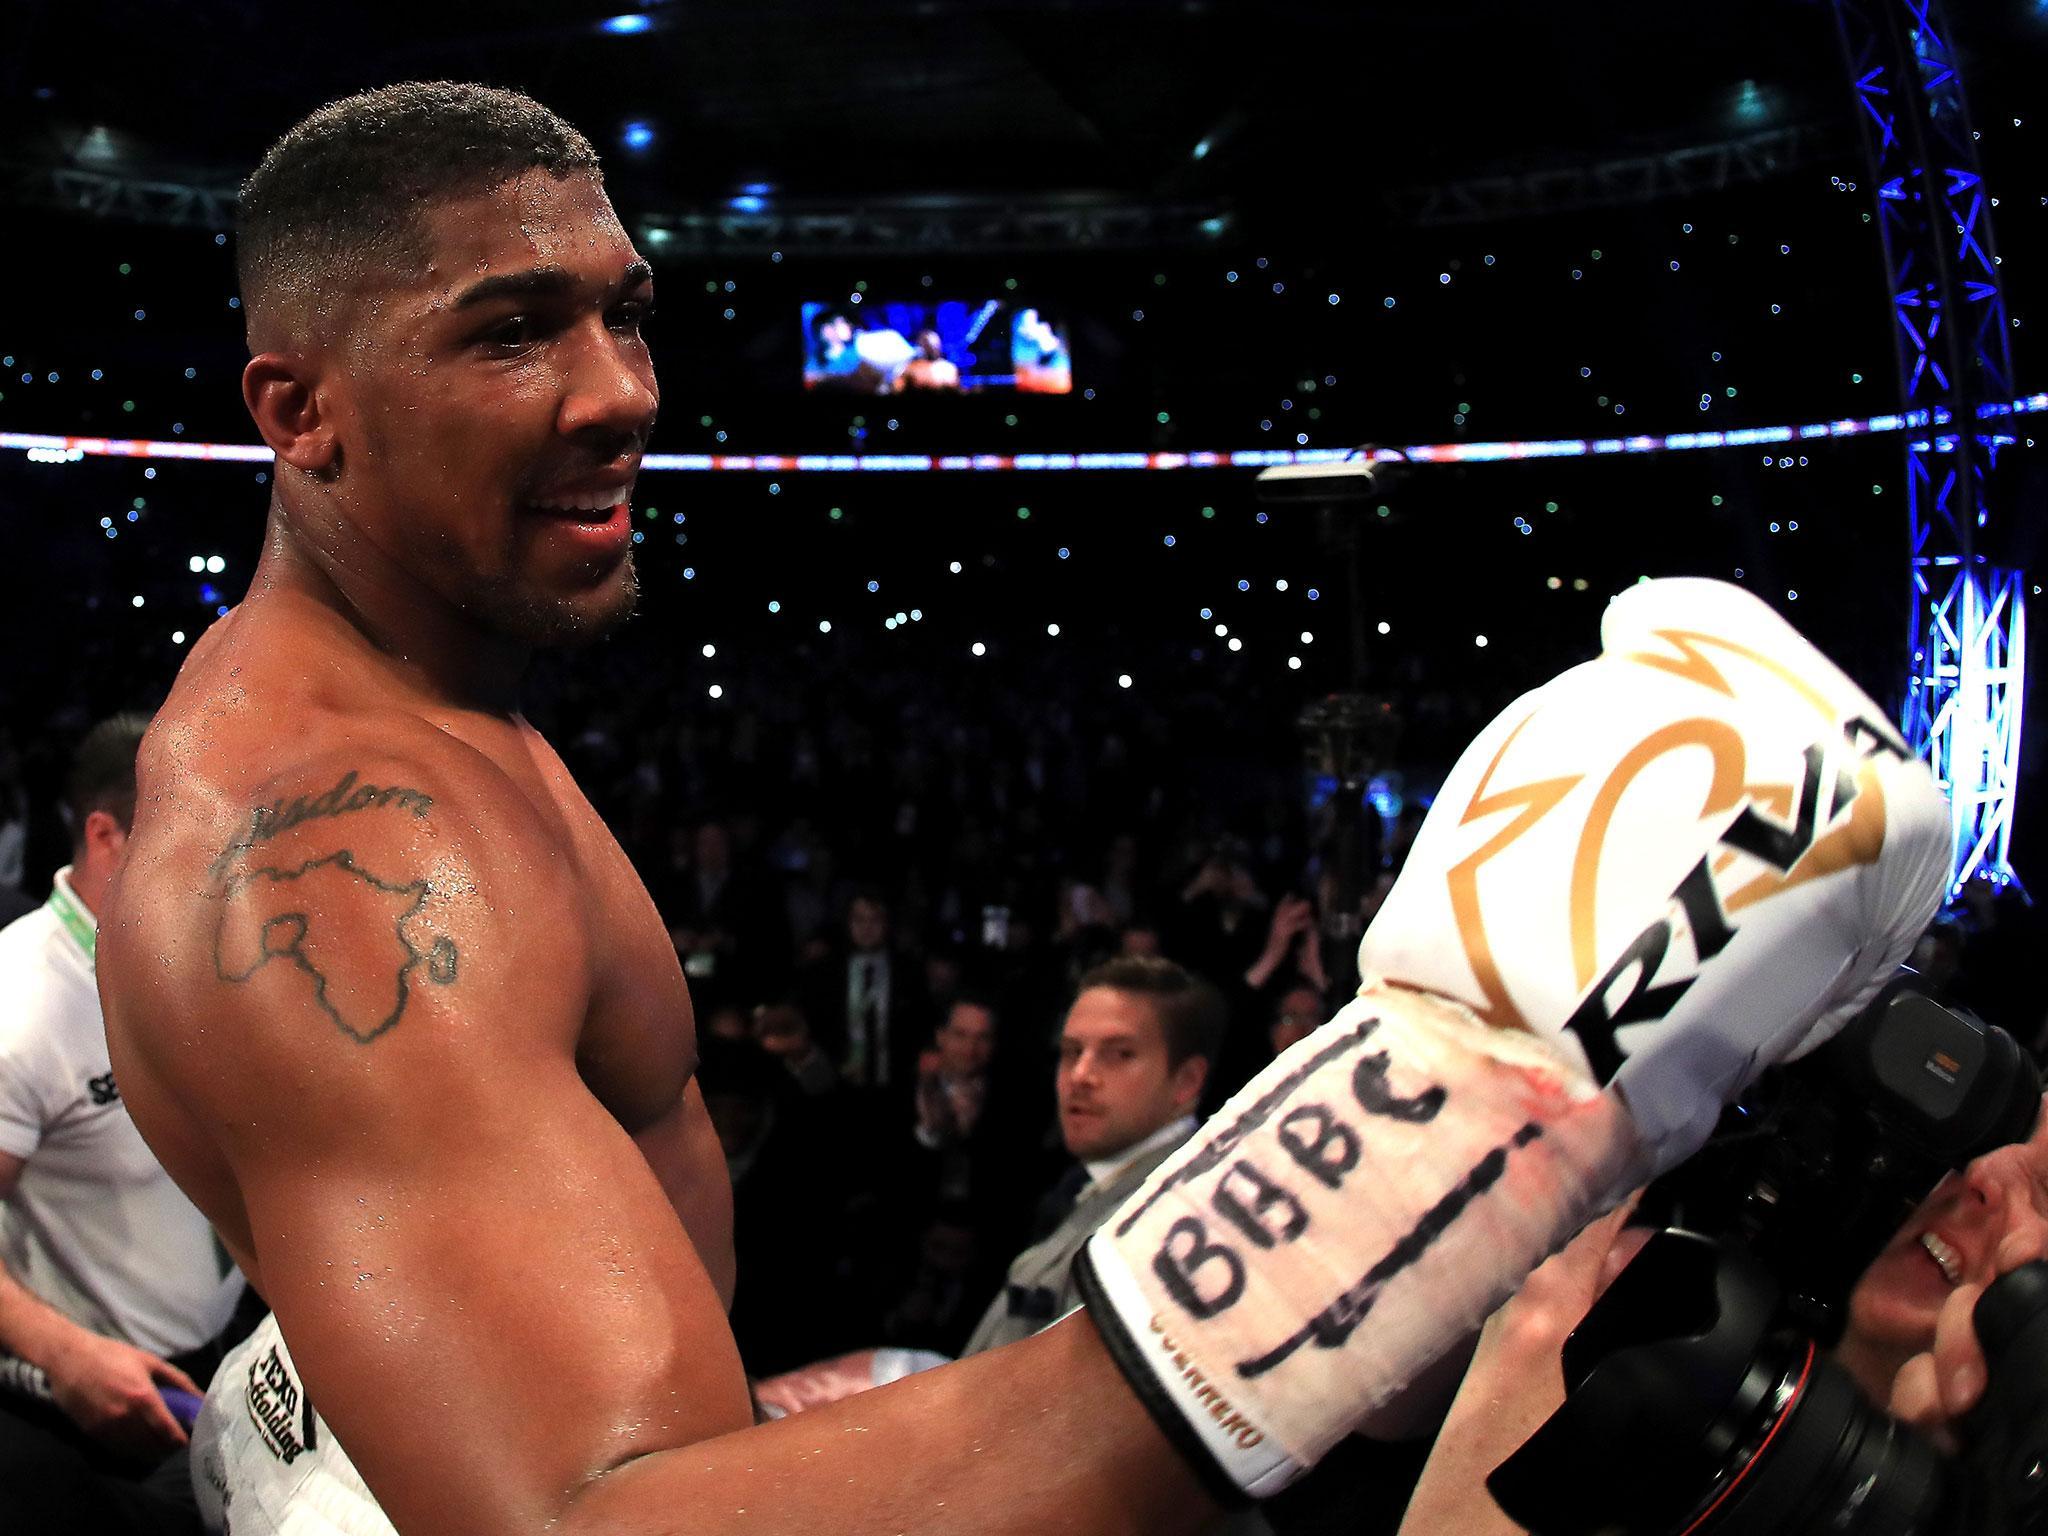 Anthony Joshua beat Wladimir Klitschko in front of 90,000 people at Wembley on Saturday